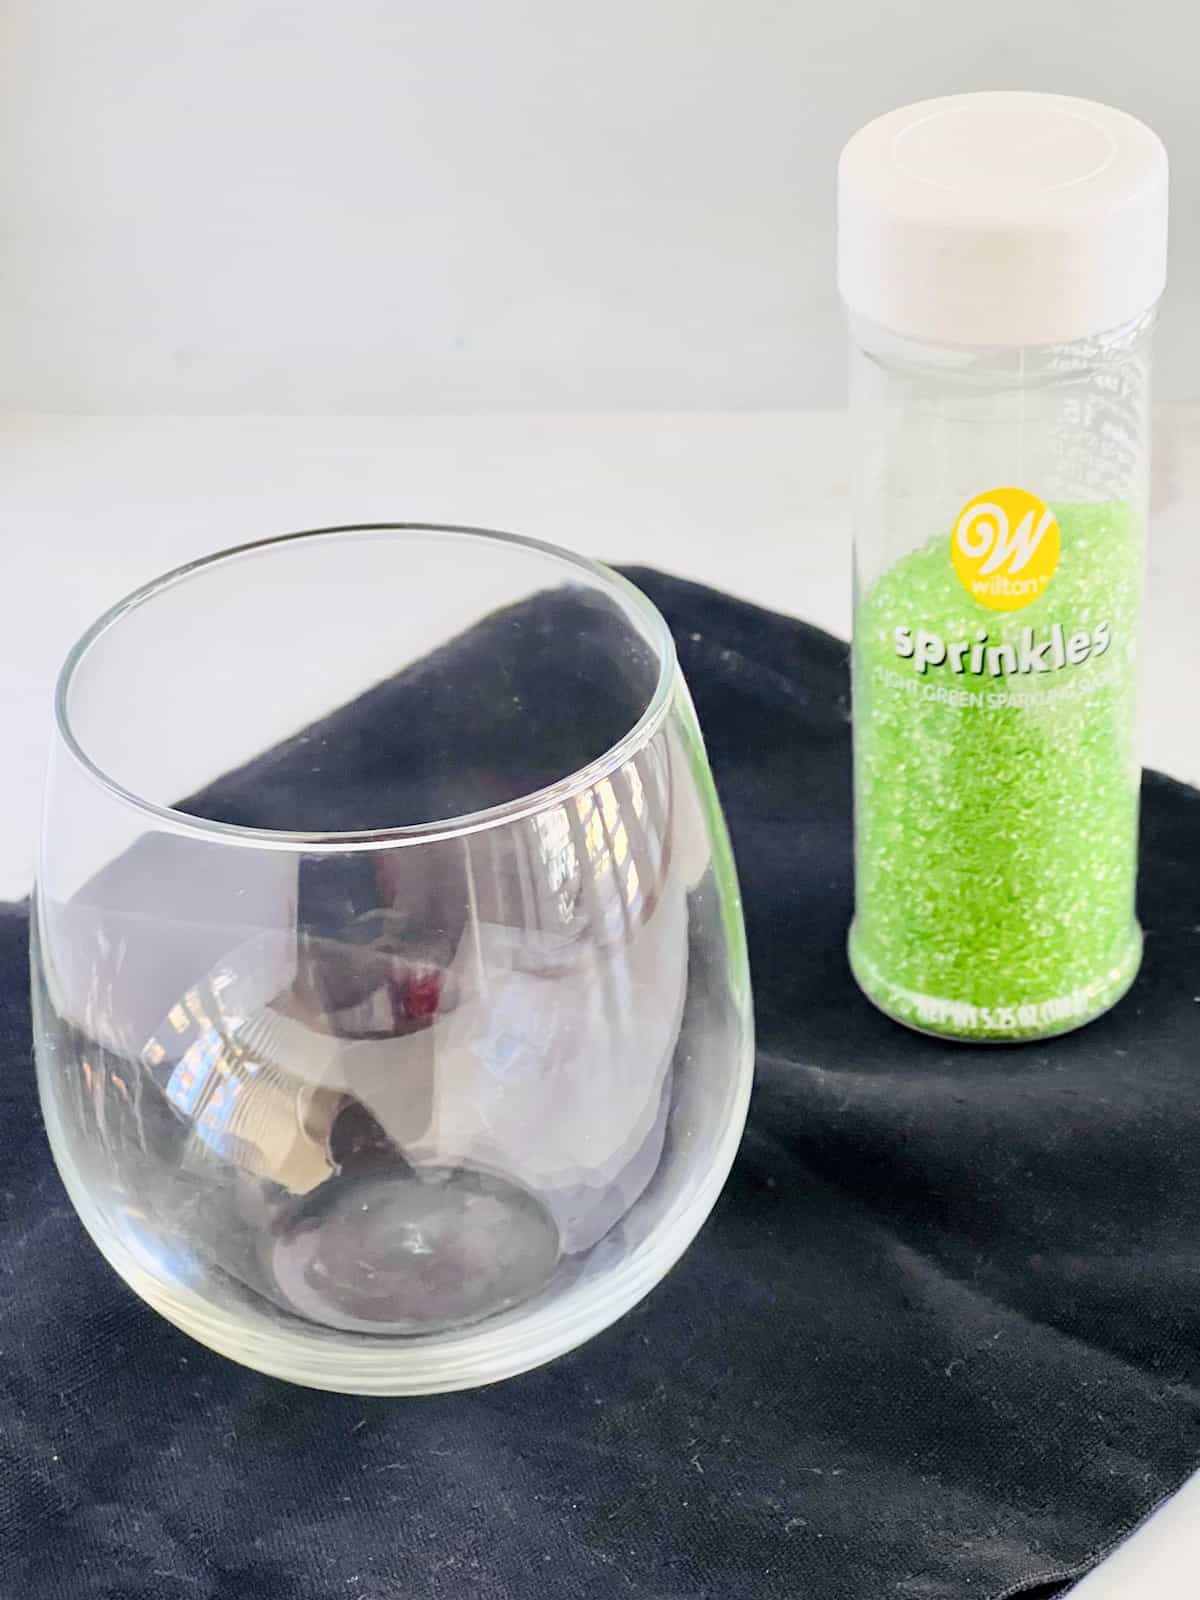 A round stemless wine glass next to a bottle of green sugar sprinkles.